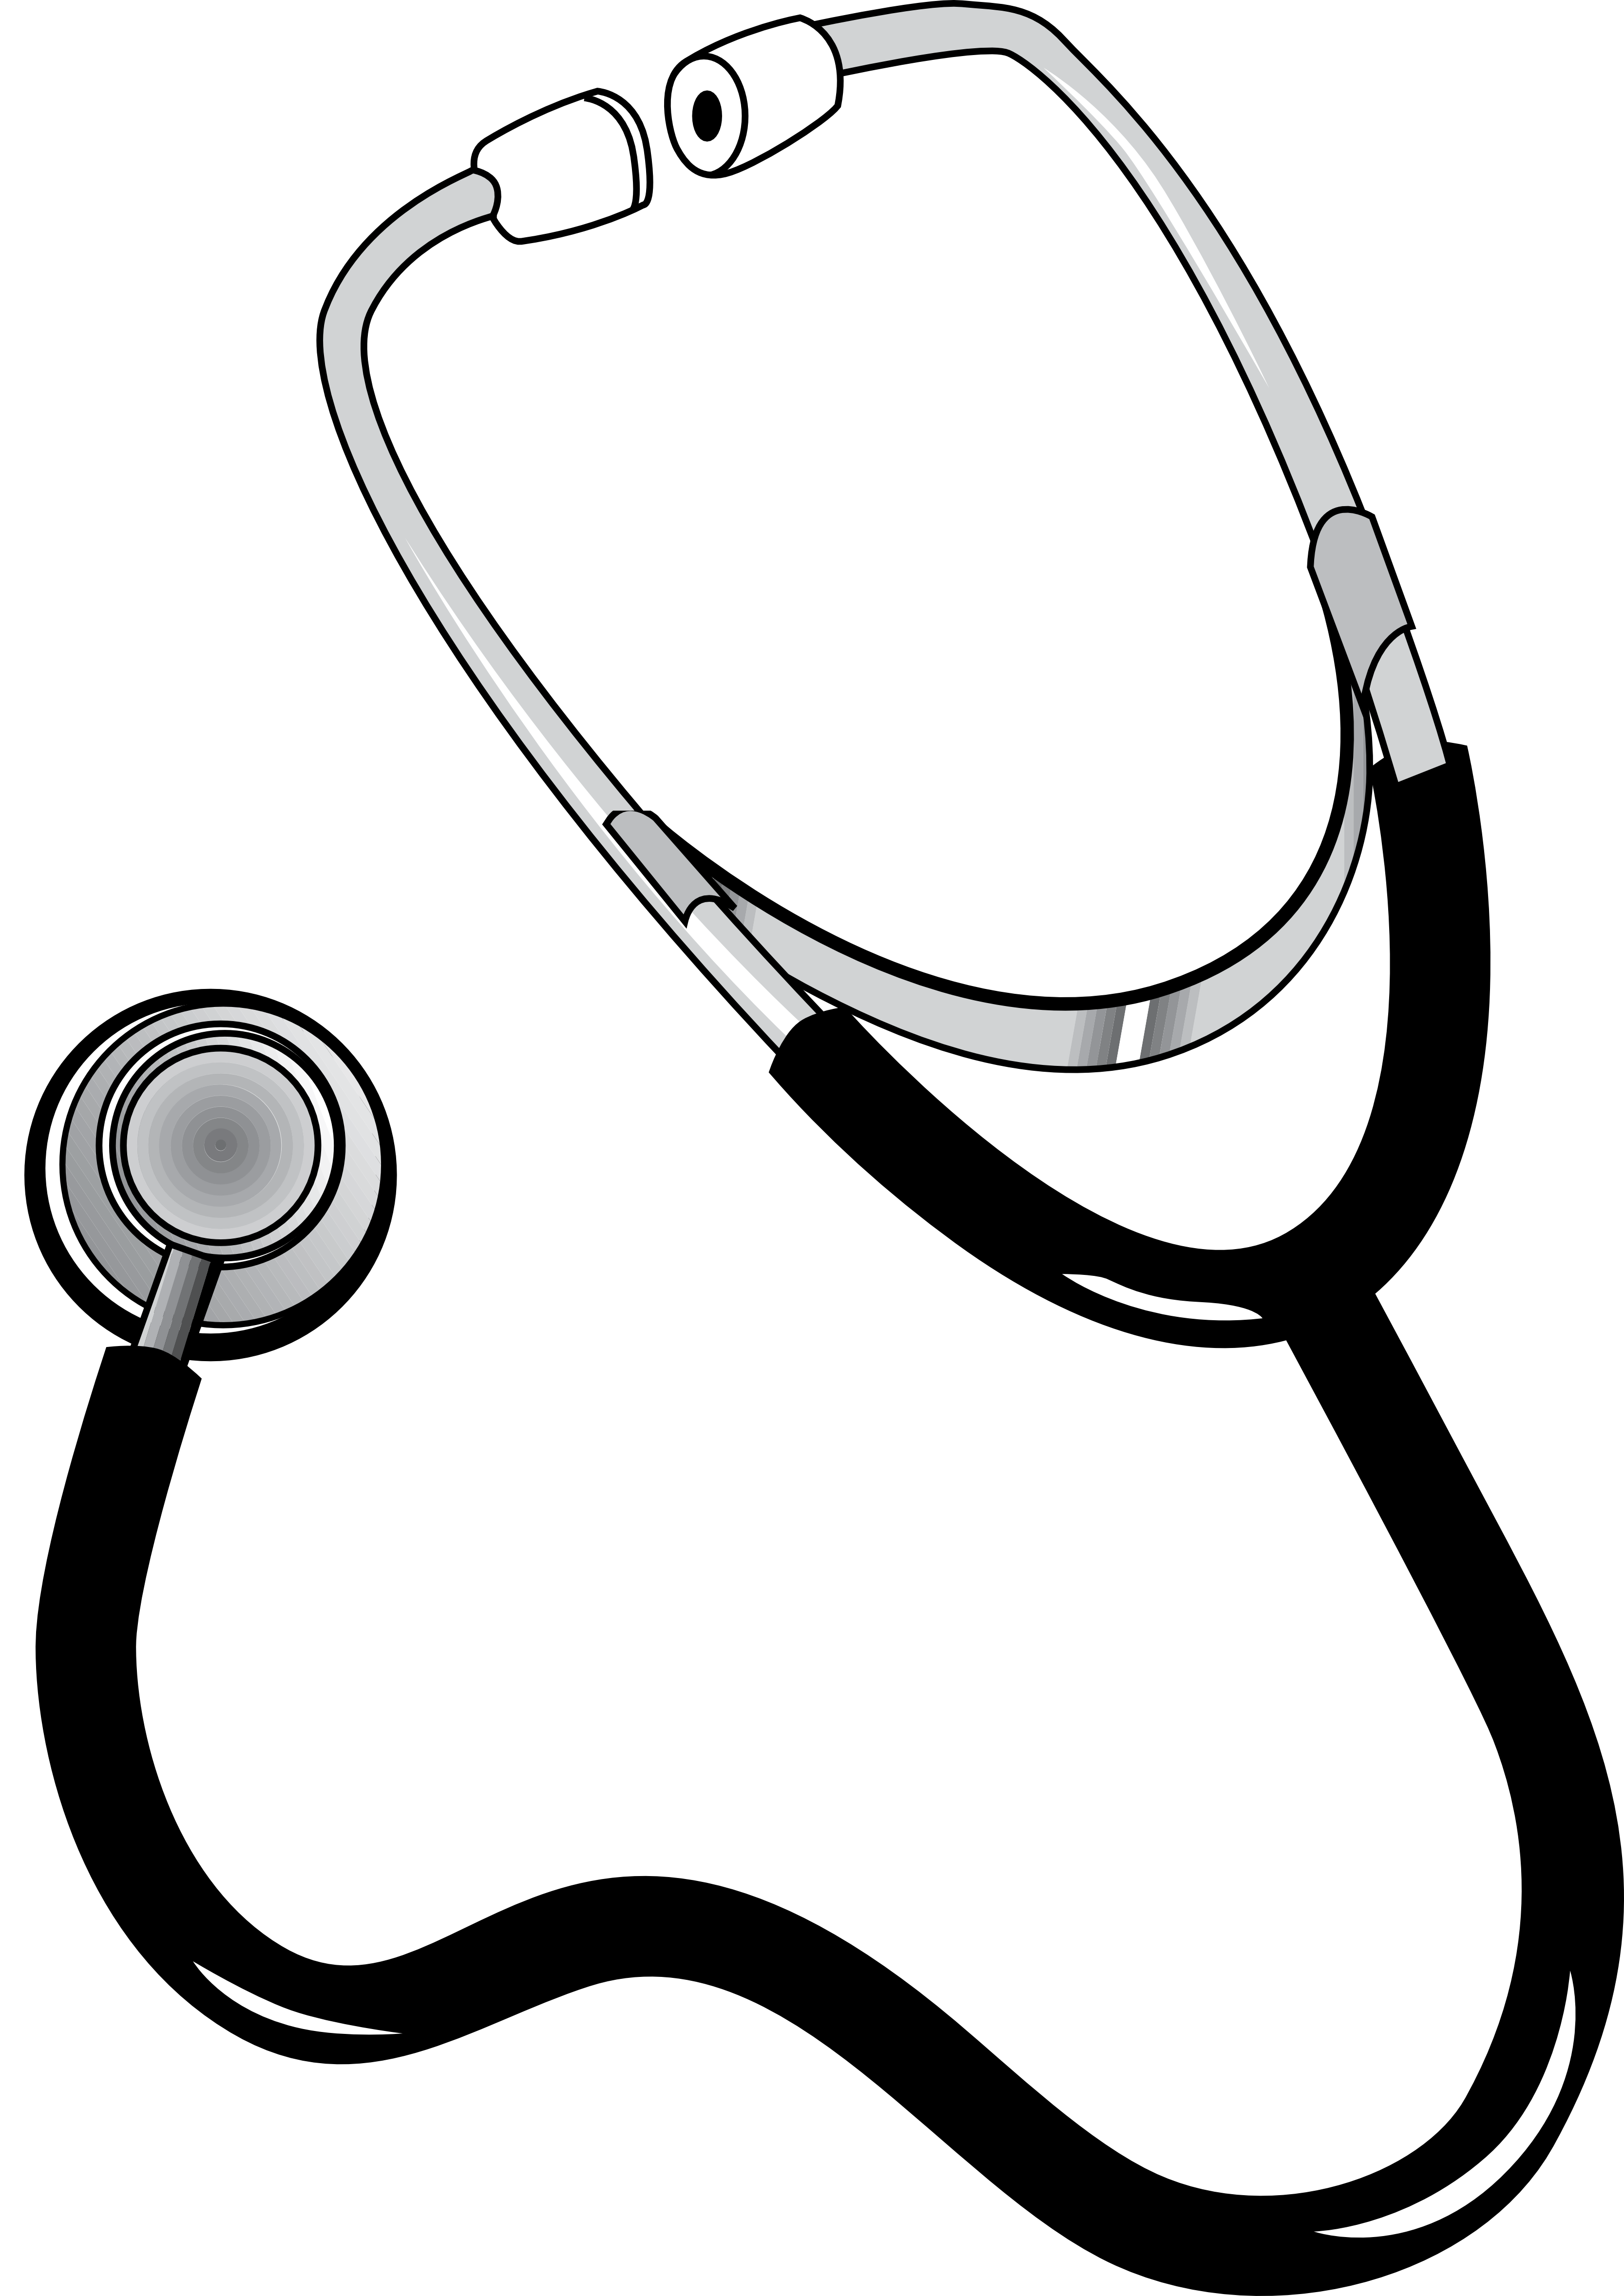 Ekg clipart stethoscope. Couch black and white